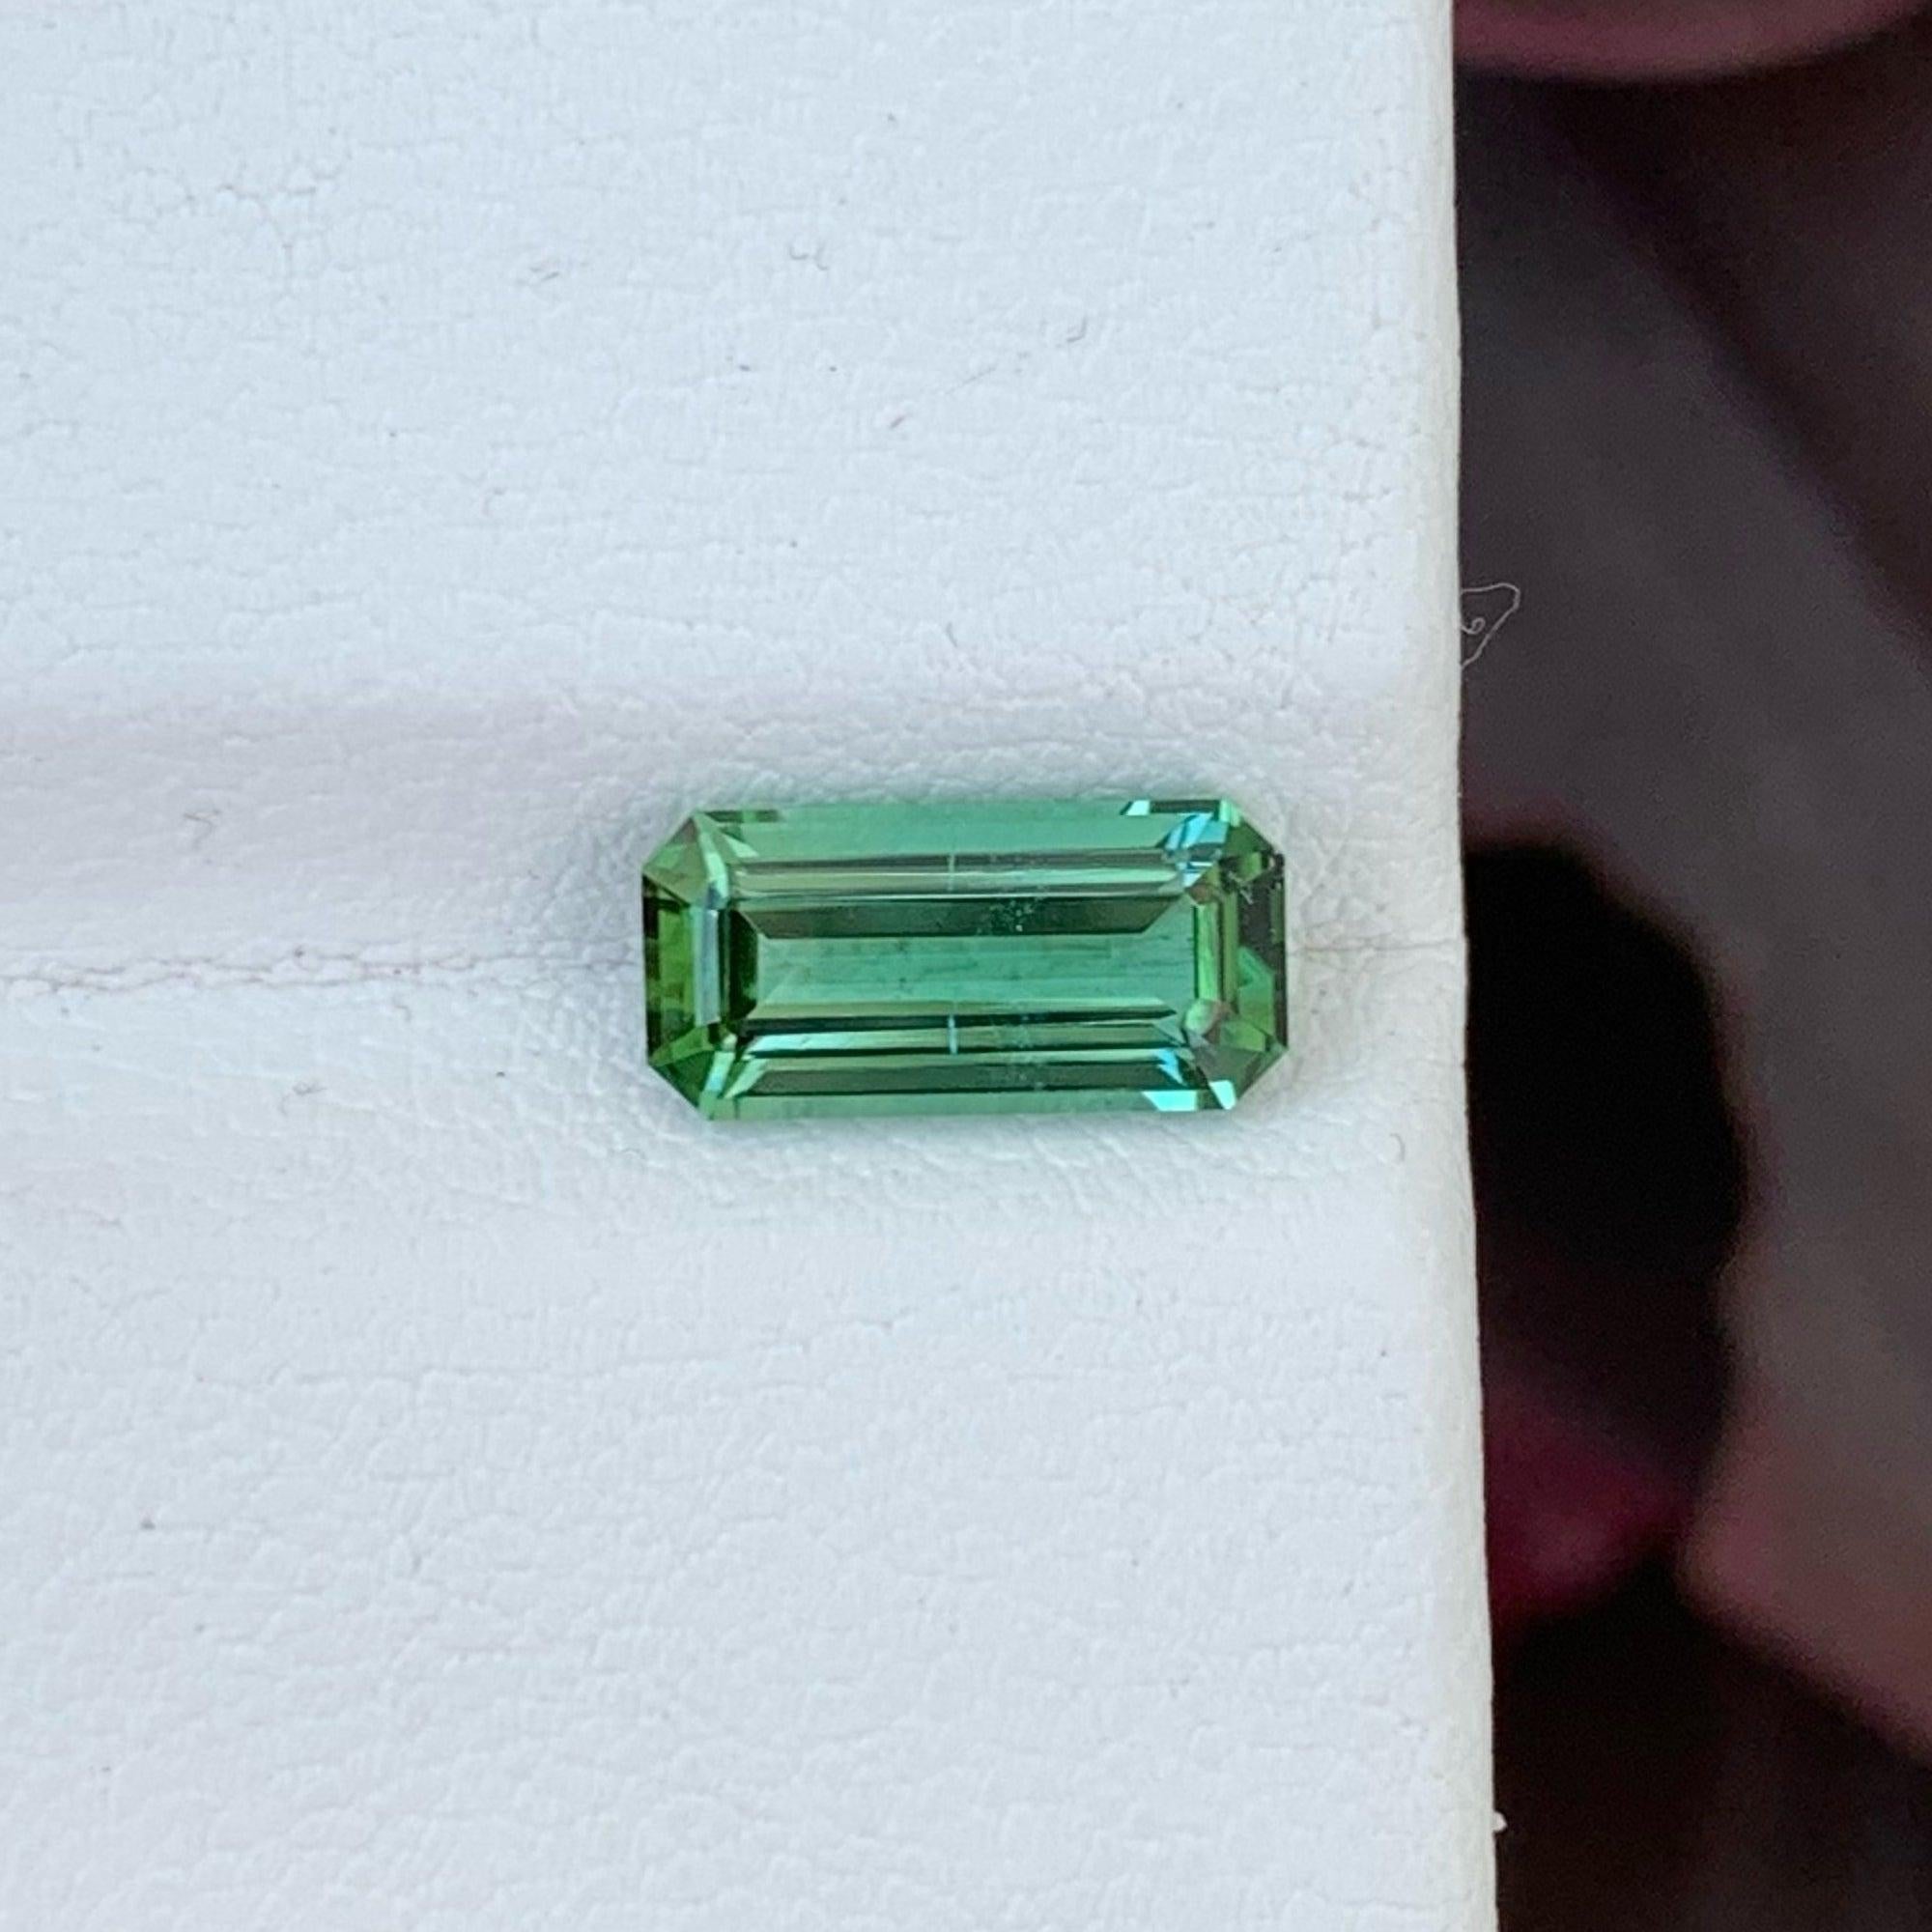 Majestic Natural Tourmaline For Ring, Available For Sale At Wholesale Price Natural High Quality 1.95 Carats Vvs Clarity Untreated Tourmaline From Afghanistan.

Informations sur le produit :

TYPE DE PIERRE PRÉCIEUSE : Tourmaline naturelle Majestic